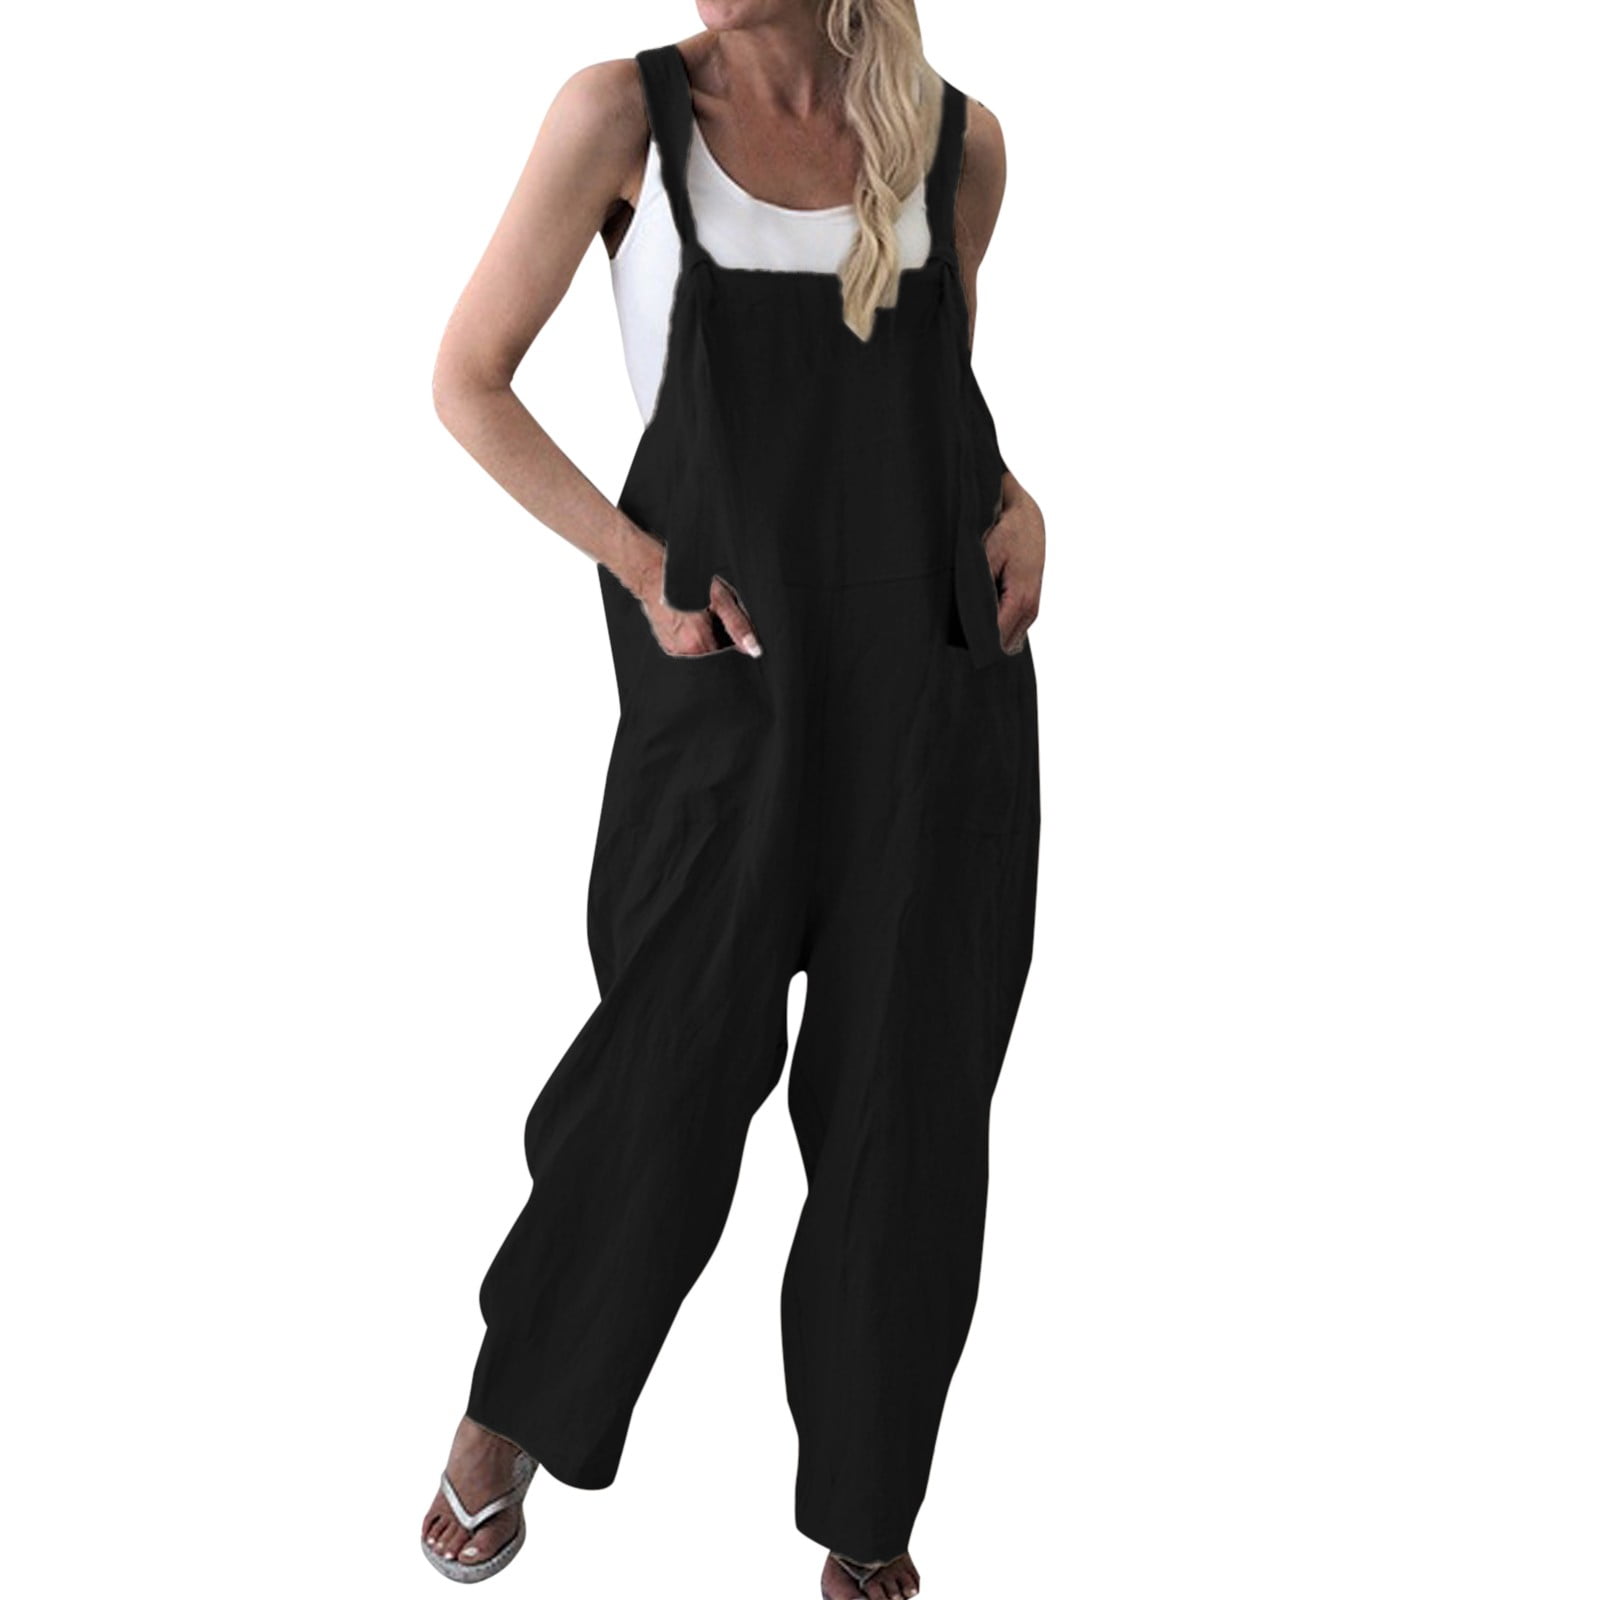 Elegant Solid V Neck Overall Sleeveless Black Womens Jumpsuits (Women's Jumpsuit), Size: Small (4)